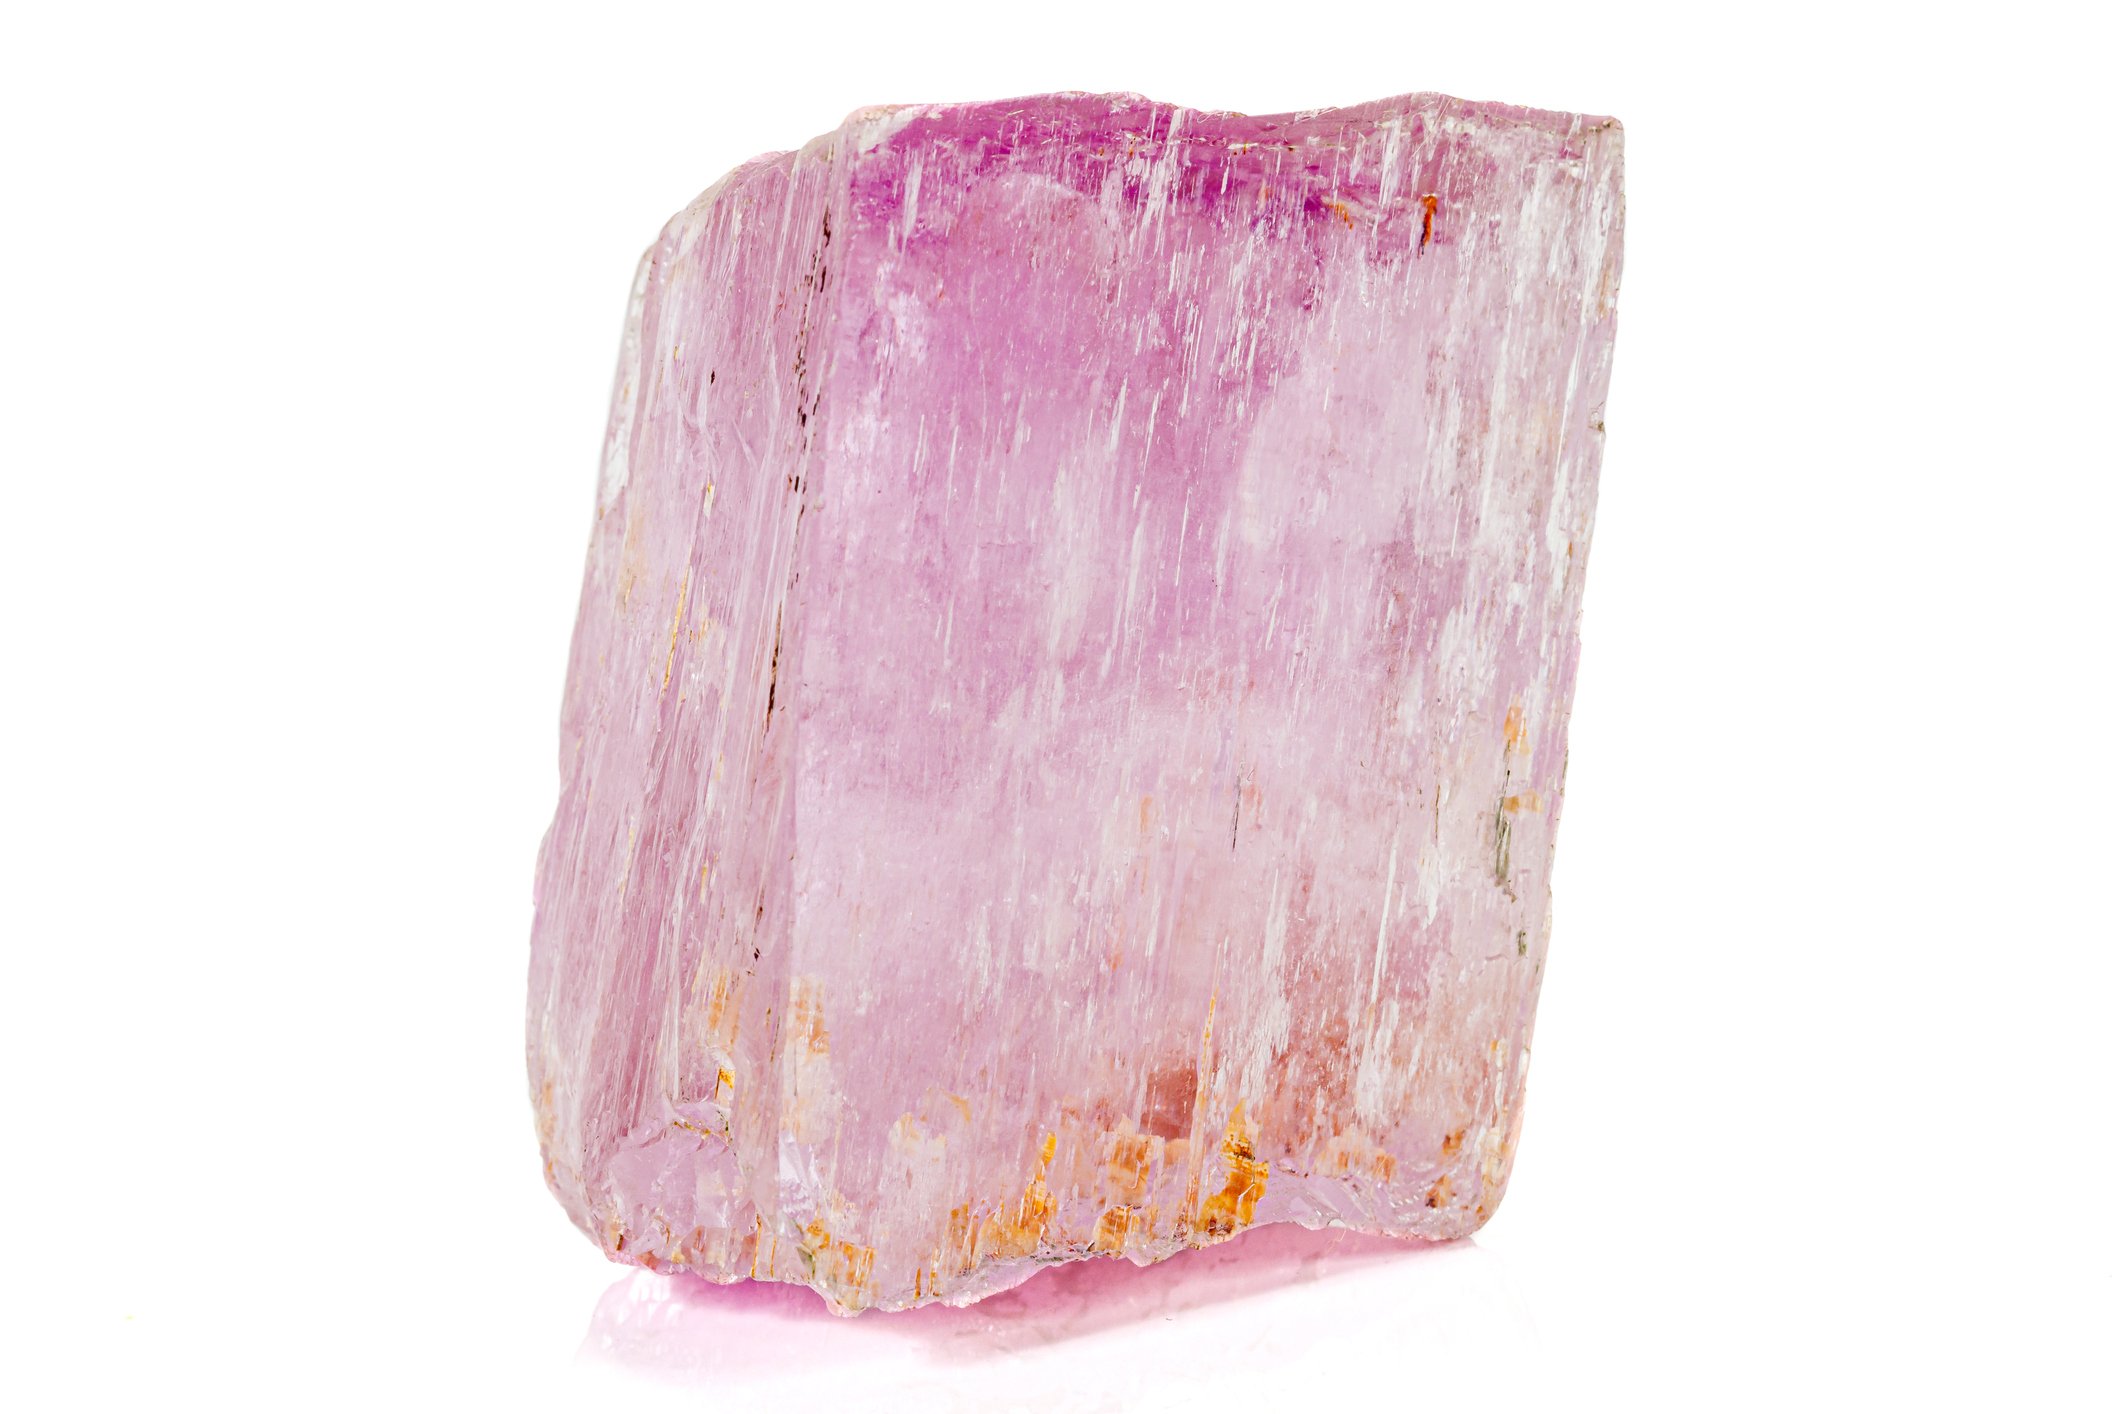 Tourmaline stones can come in different colors such as green, pink, red, yellow and brown. (iStock Photo)